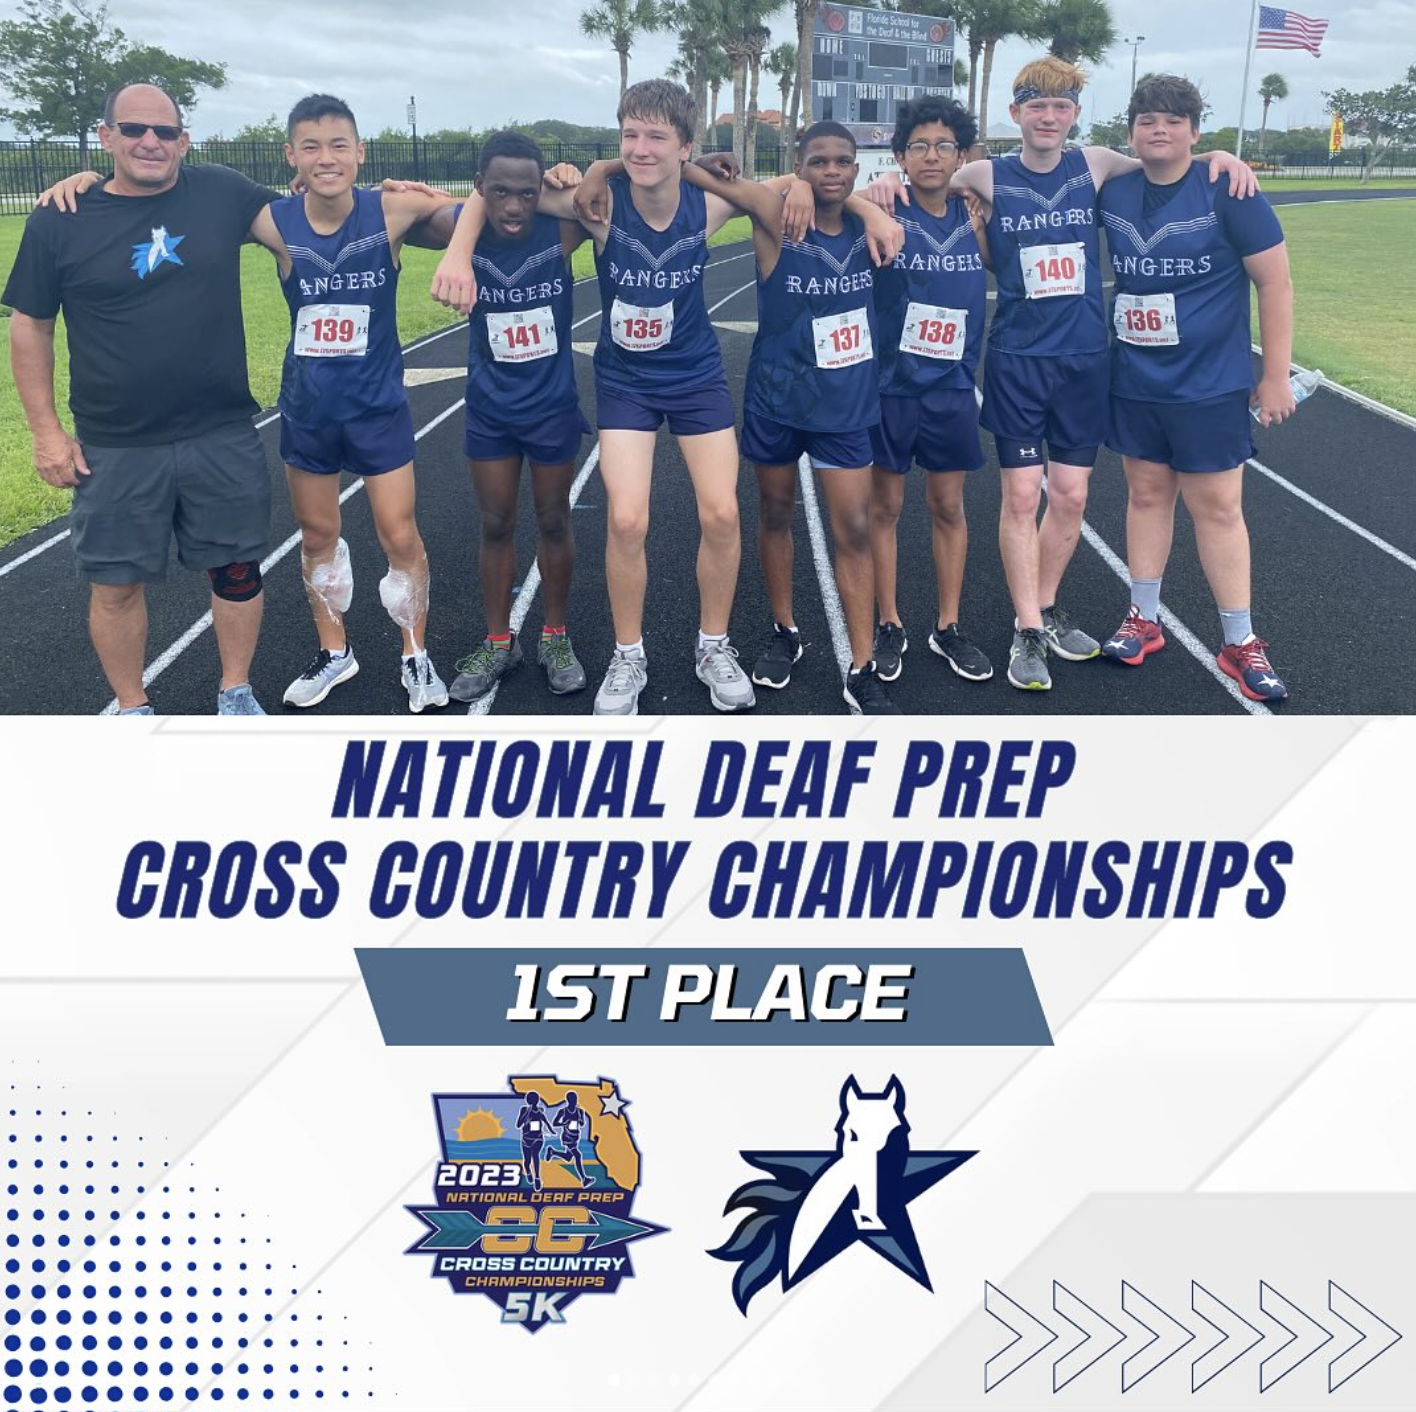 Top part of the photo: 7 cross country athletes posed (some were smiling and some were not) with their coach with the track & field background. The athletics wore cross country numbered uniforms with words, “Rangers Cross Country” (navy blue and white). Bottom part of the photo: Text says in blue bold, National Deaf Prep Cross Country Championships 1st place with two logos (2023 National Deaf Prep CC Cross Country Championships 5k and Rangers).